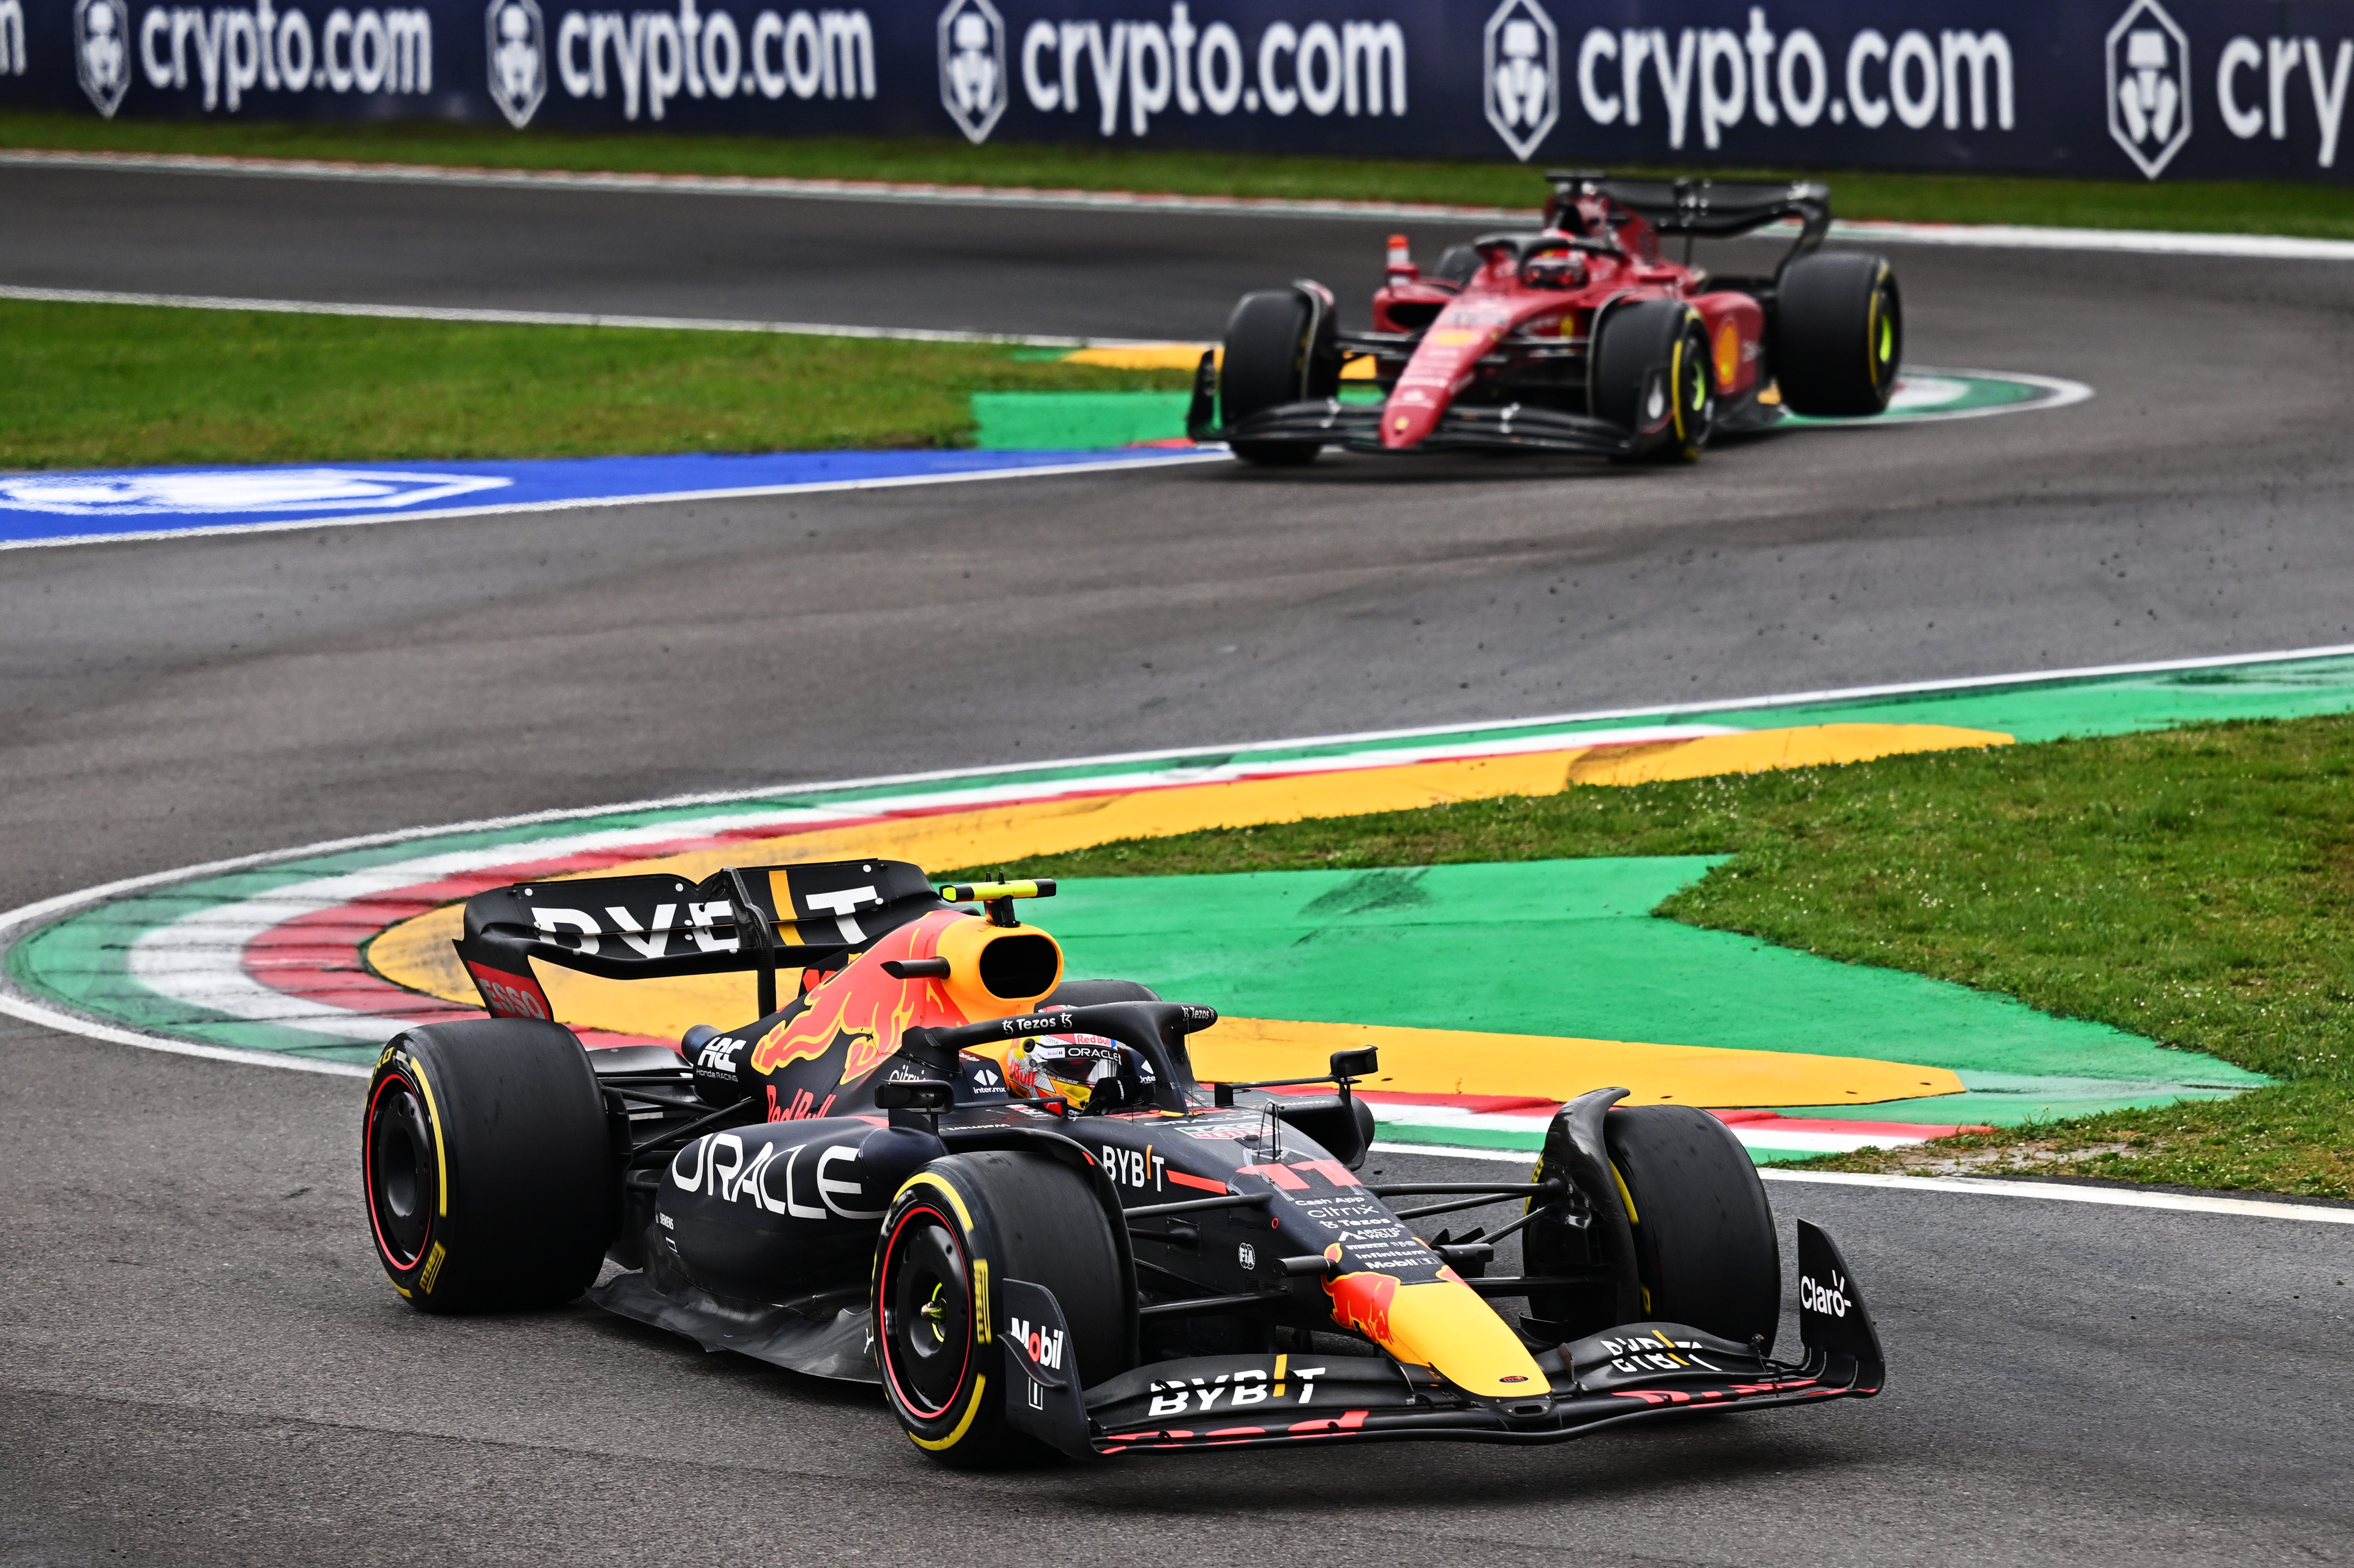 Sergio Perez Of Mexico Driving The (11) RB18 Leads Charles Leclerc Of Monaco Driving (16) The Ferrari F1 75 At Imola, 2022. (Photo By Clive Mason Getty Image)[4938×3290]